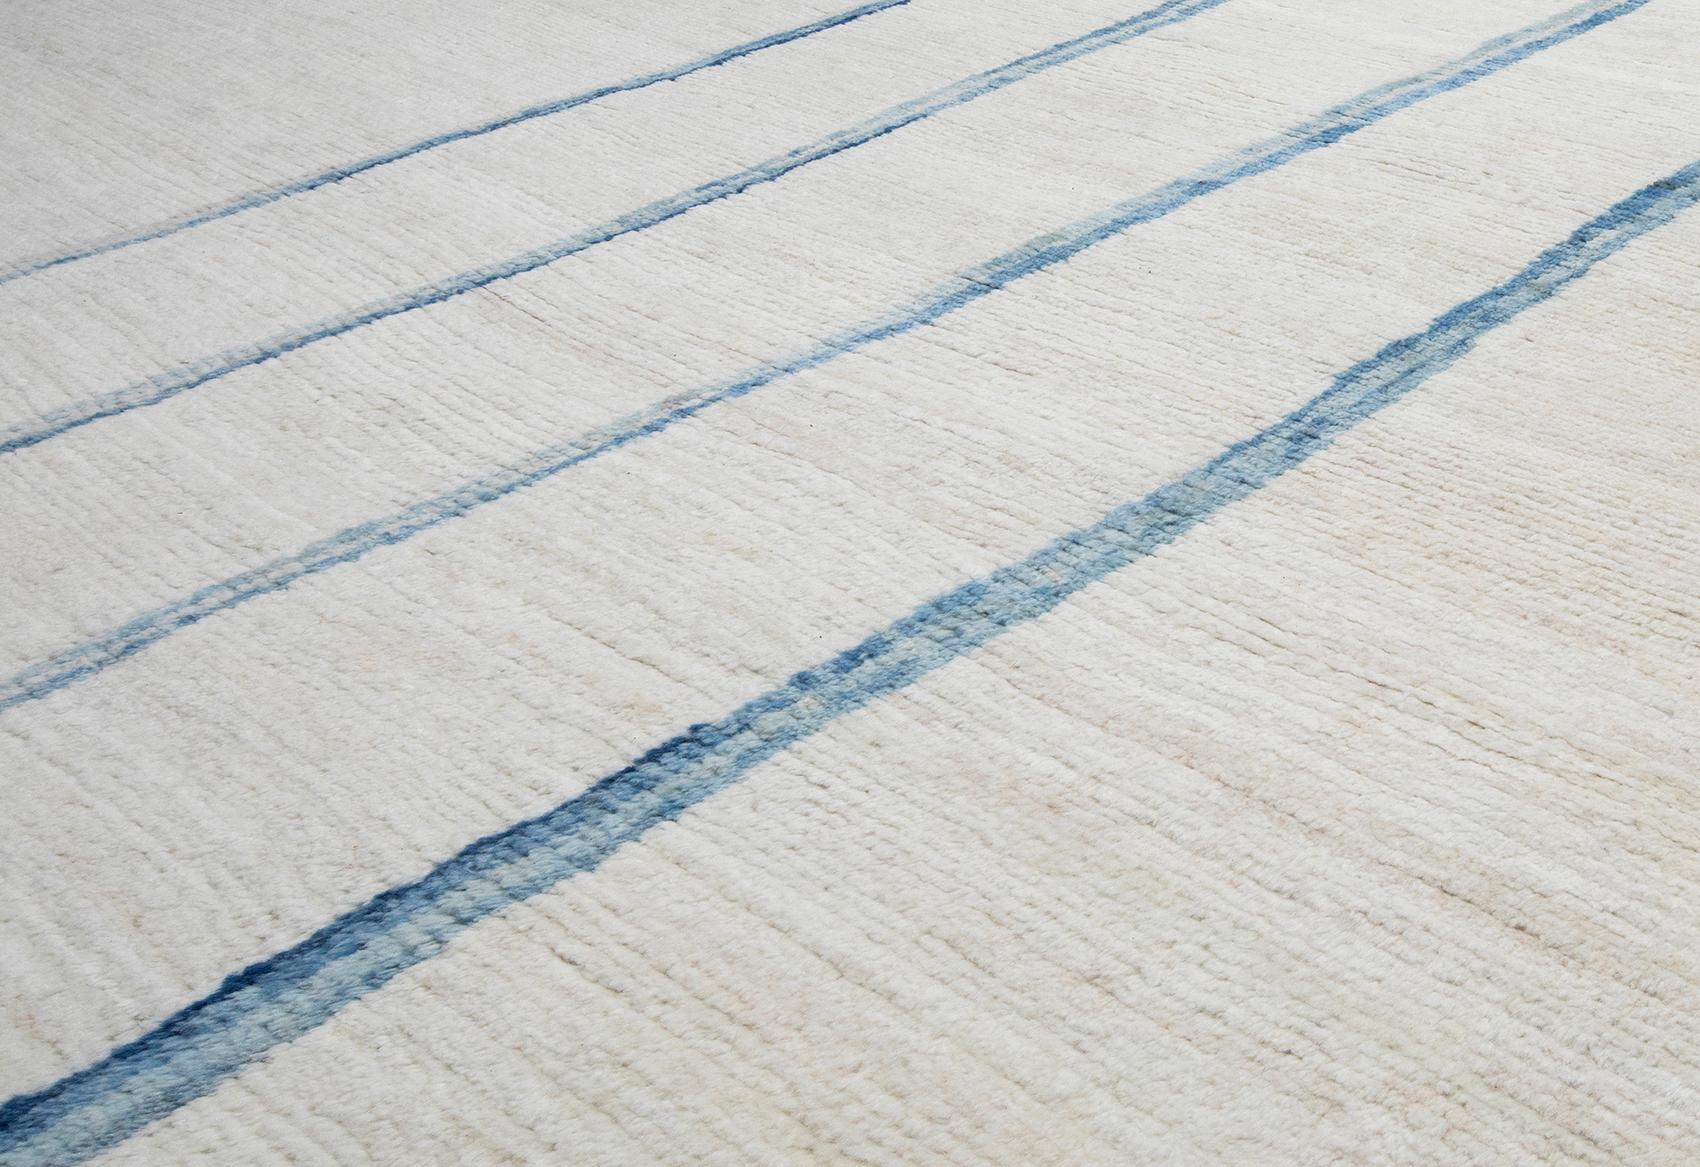 Our Crete rug is comprised of 100% handspun wool that has a subtle sheen to it. It has a great deal of texture and is soft to the touch. It features a minimal linear design.
Custom color and size available. Rug size is 9'5